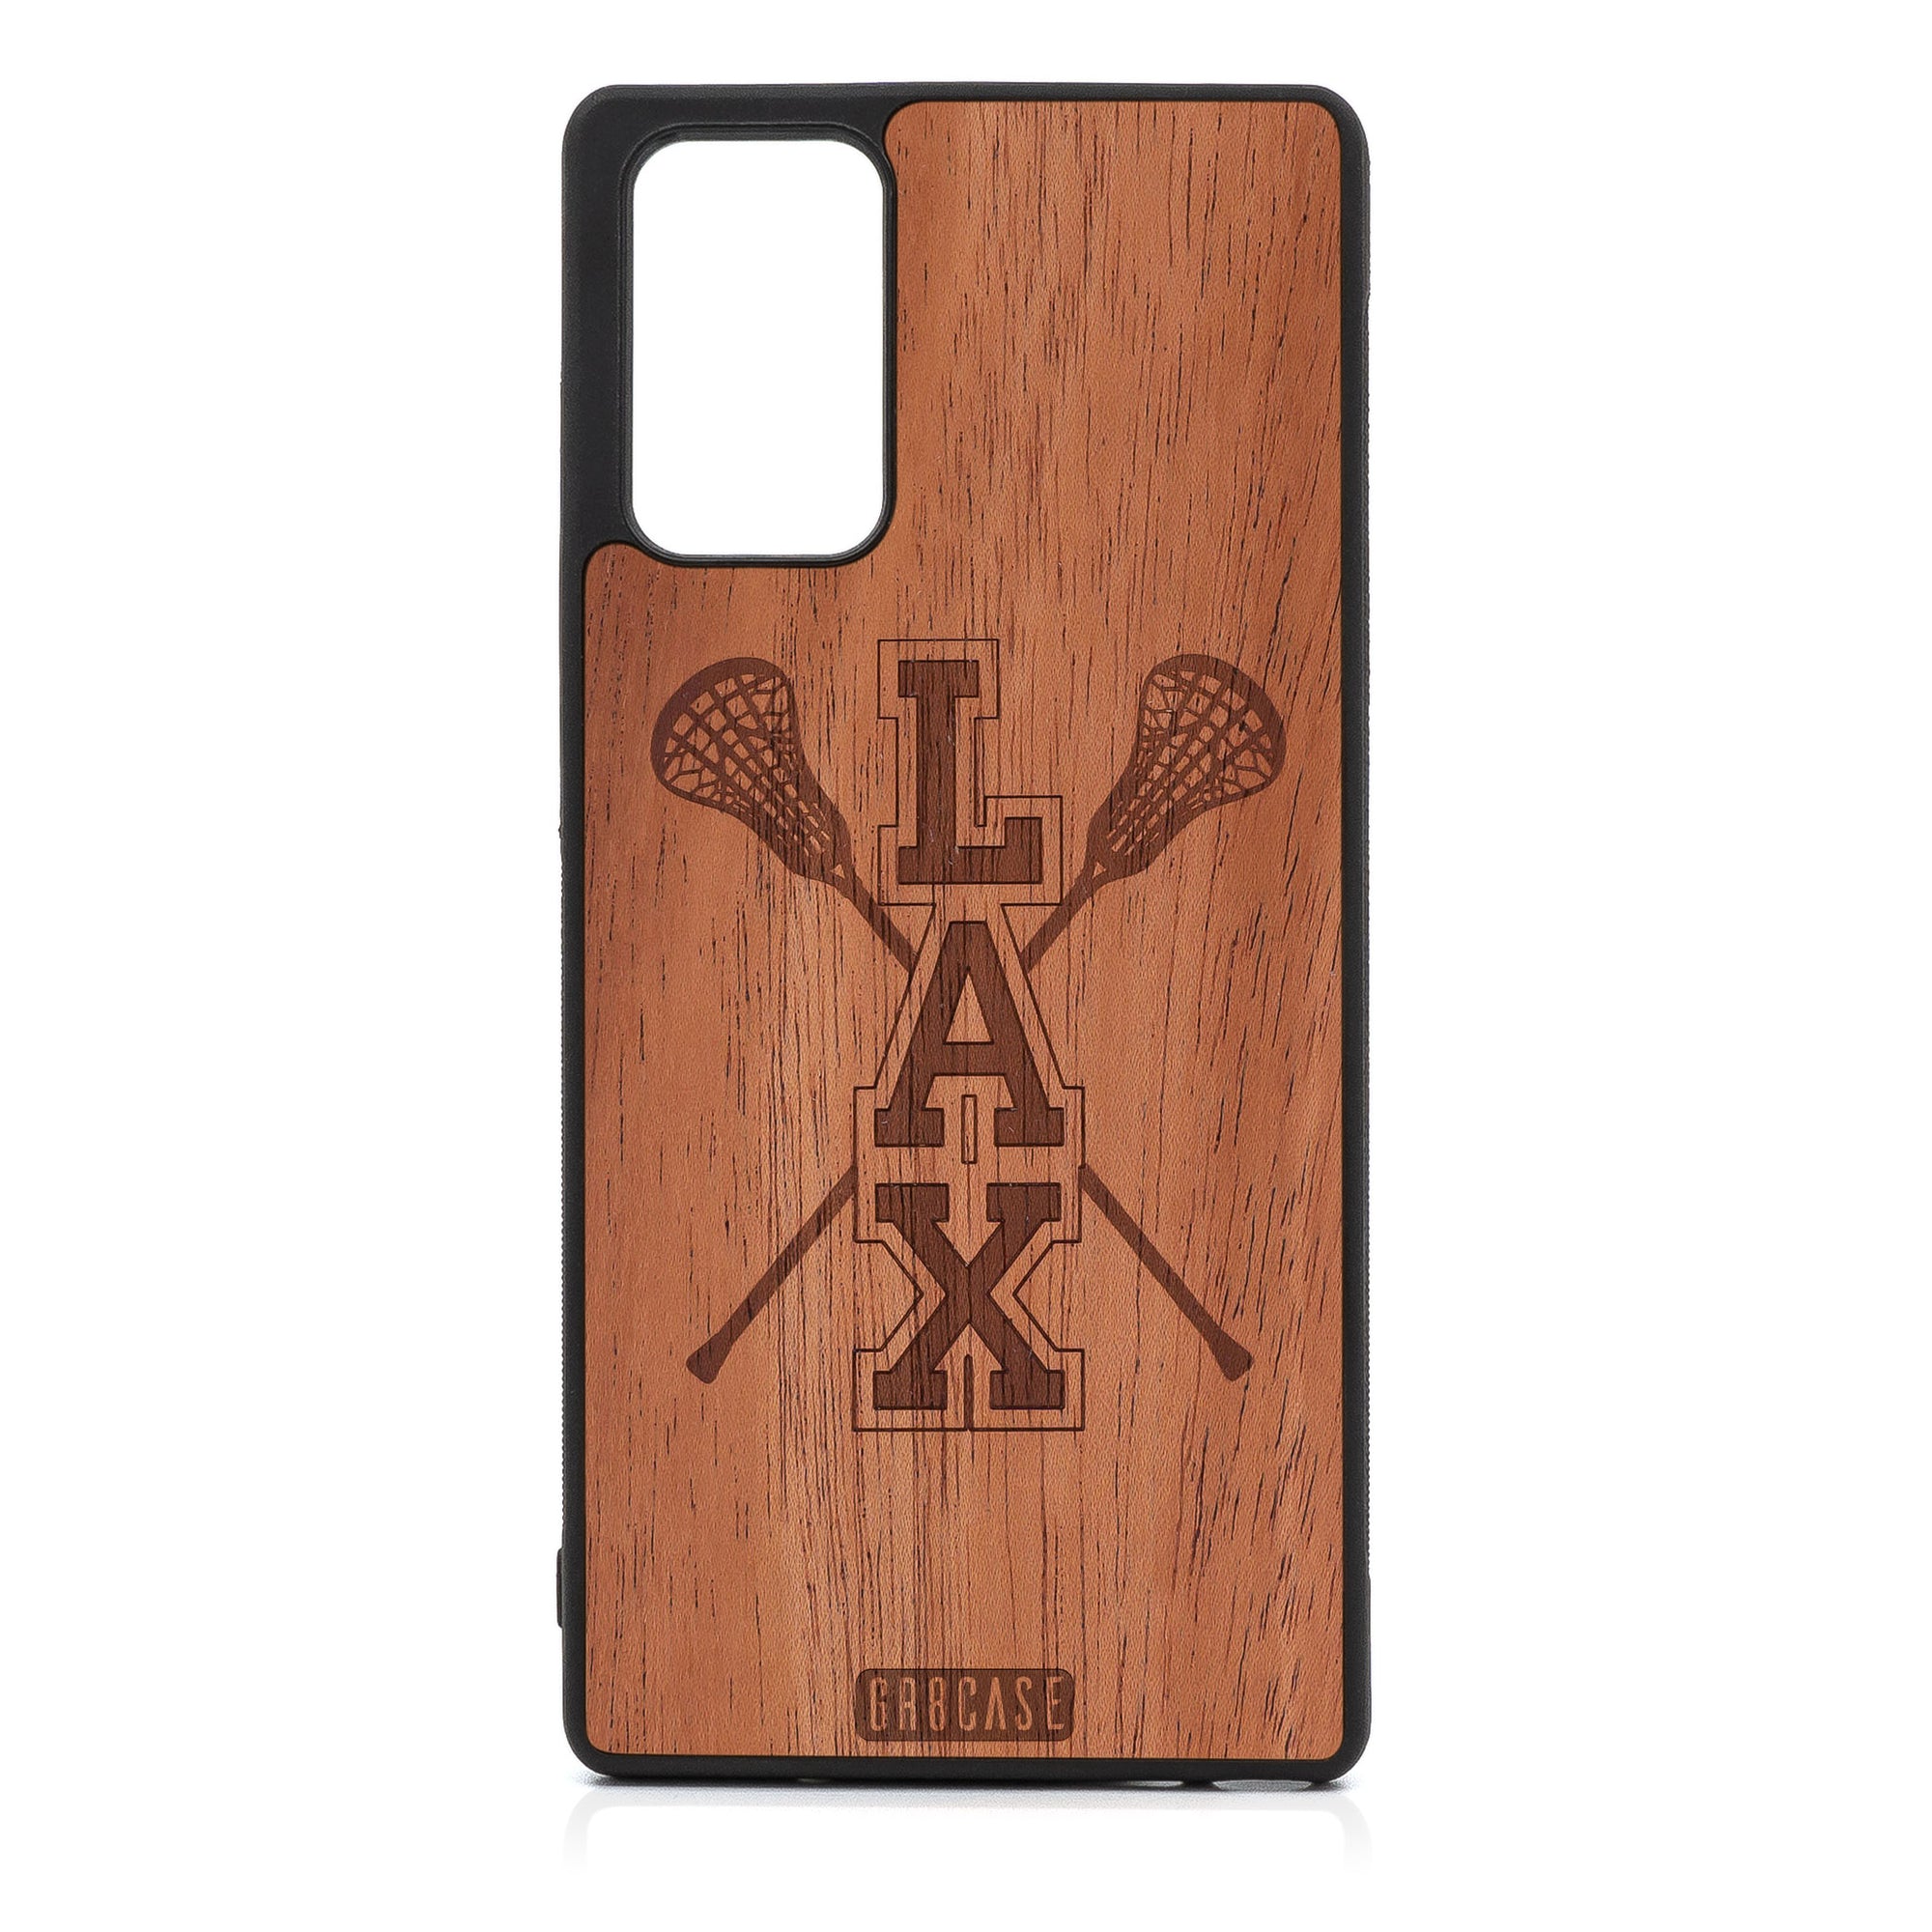 Lacrosse (LAX) Sticks Design Wood Case For Samsung Galaxy Note 20